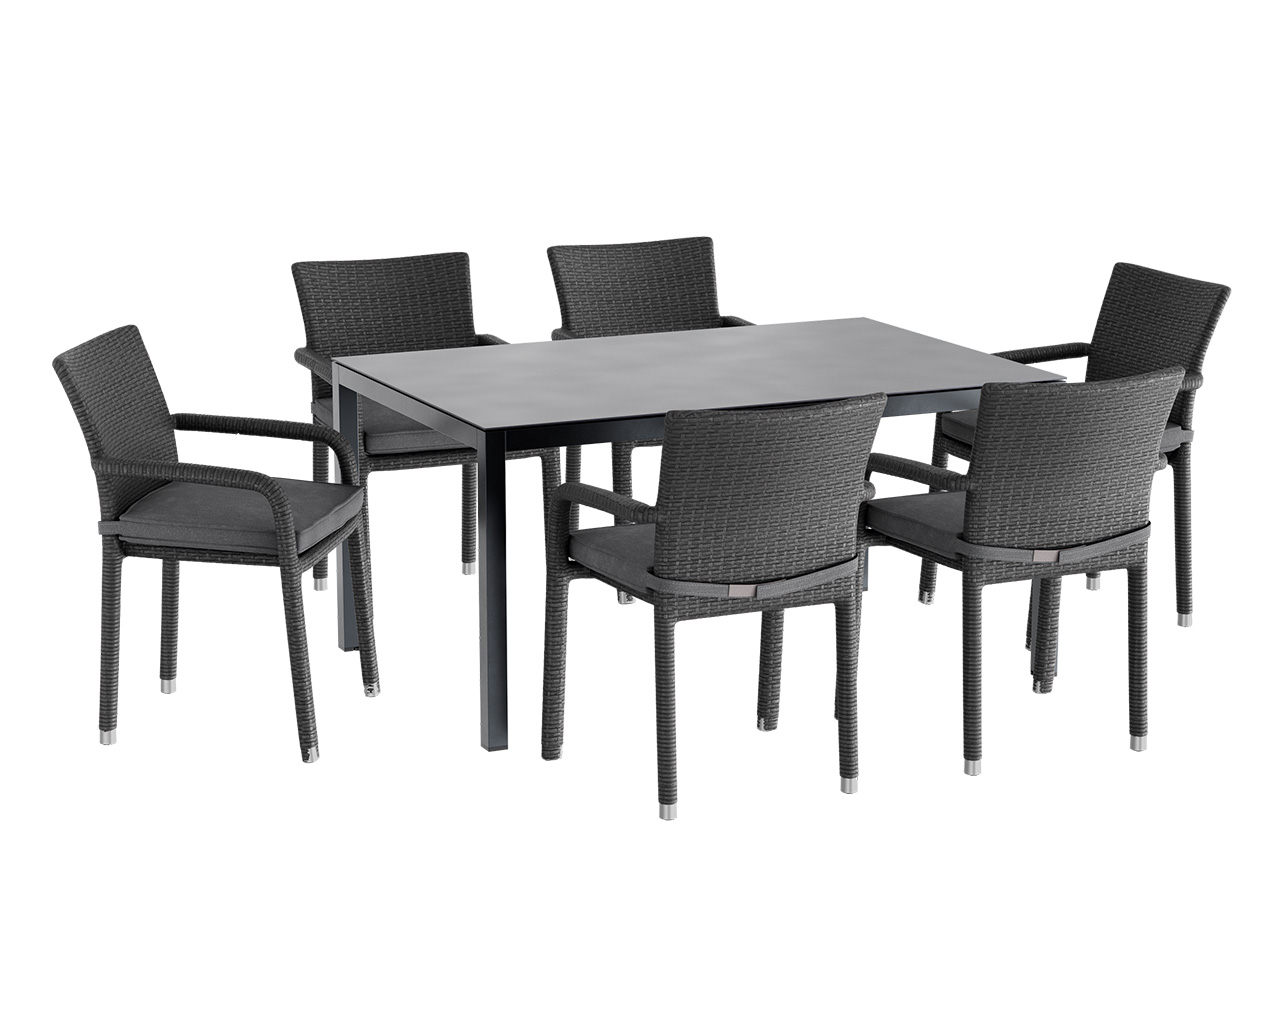 Avalon-Boston 7 Piece Dining Setting, , hi-res image number null